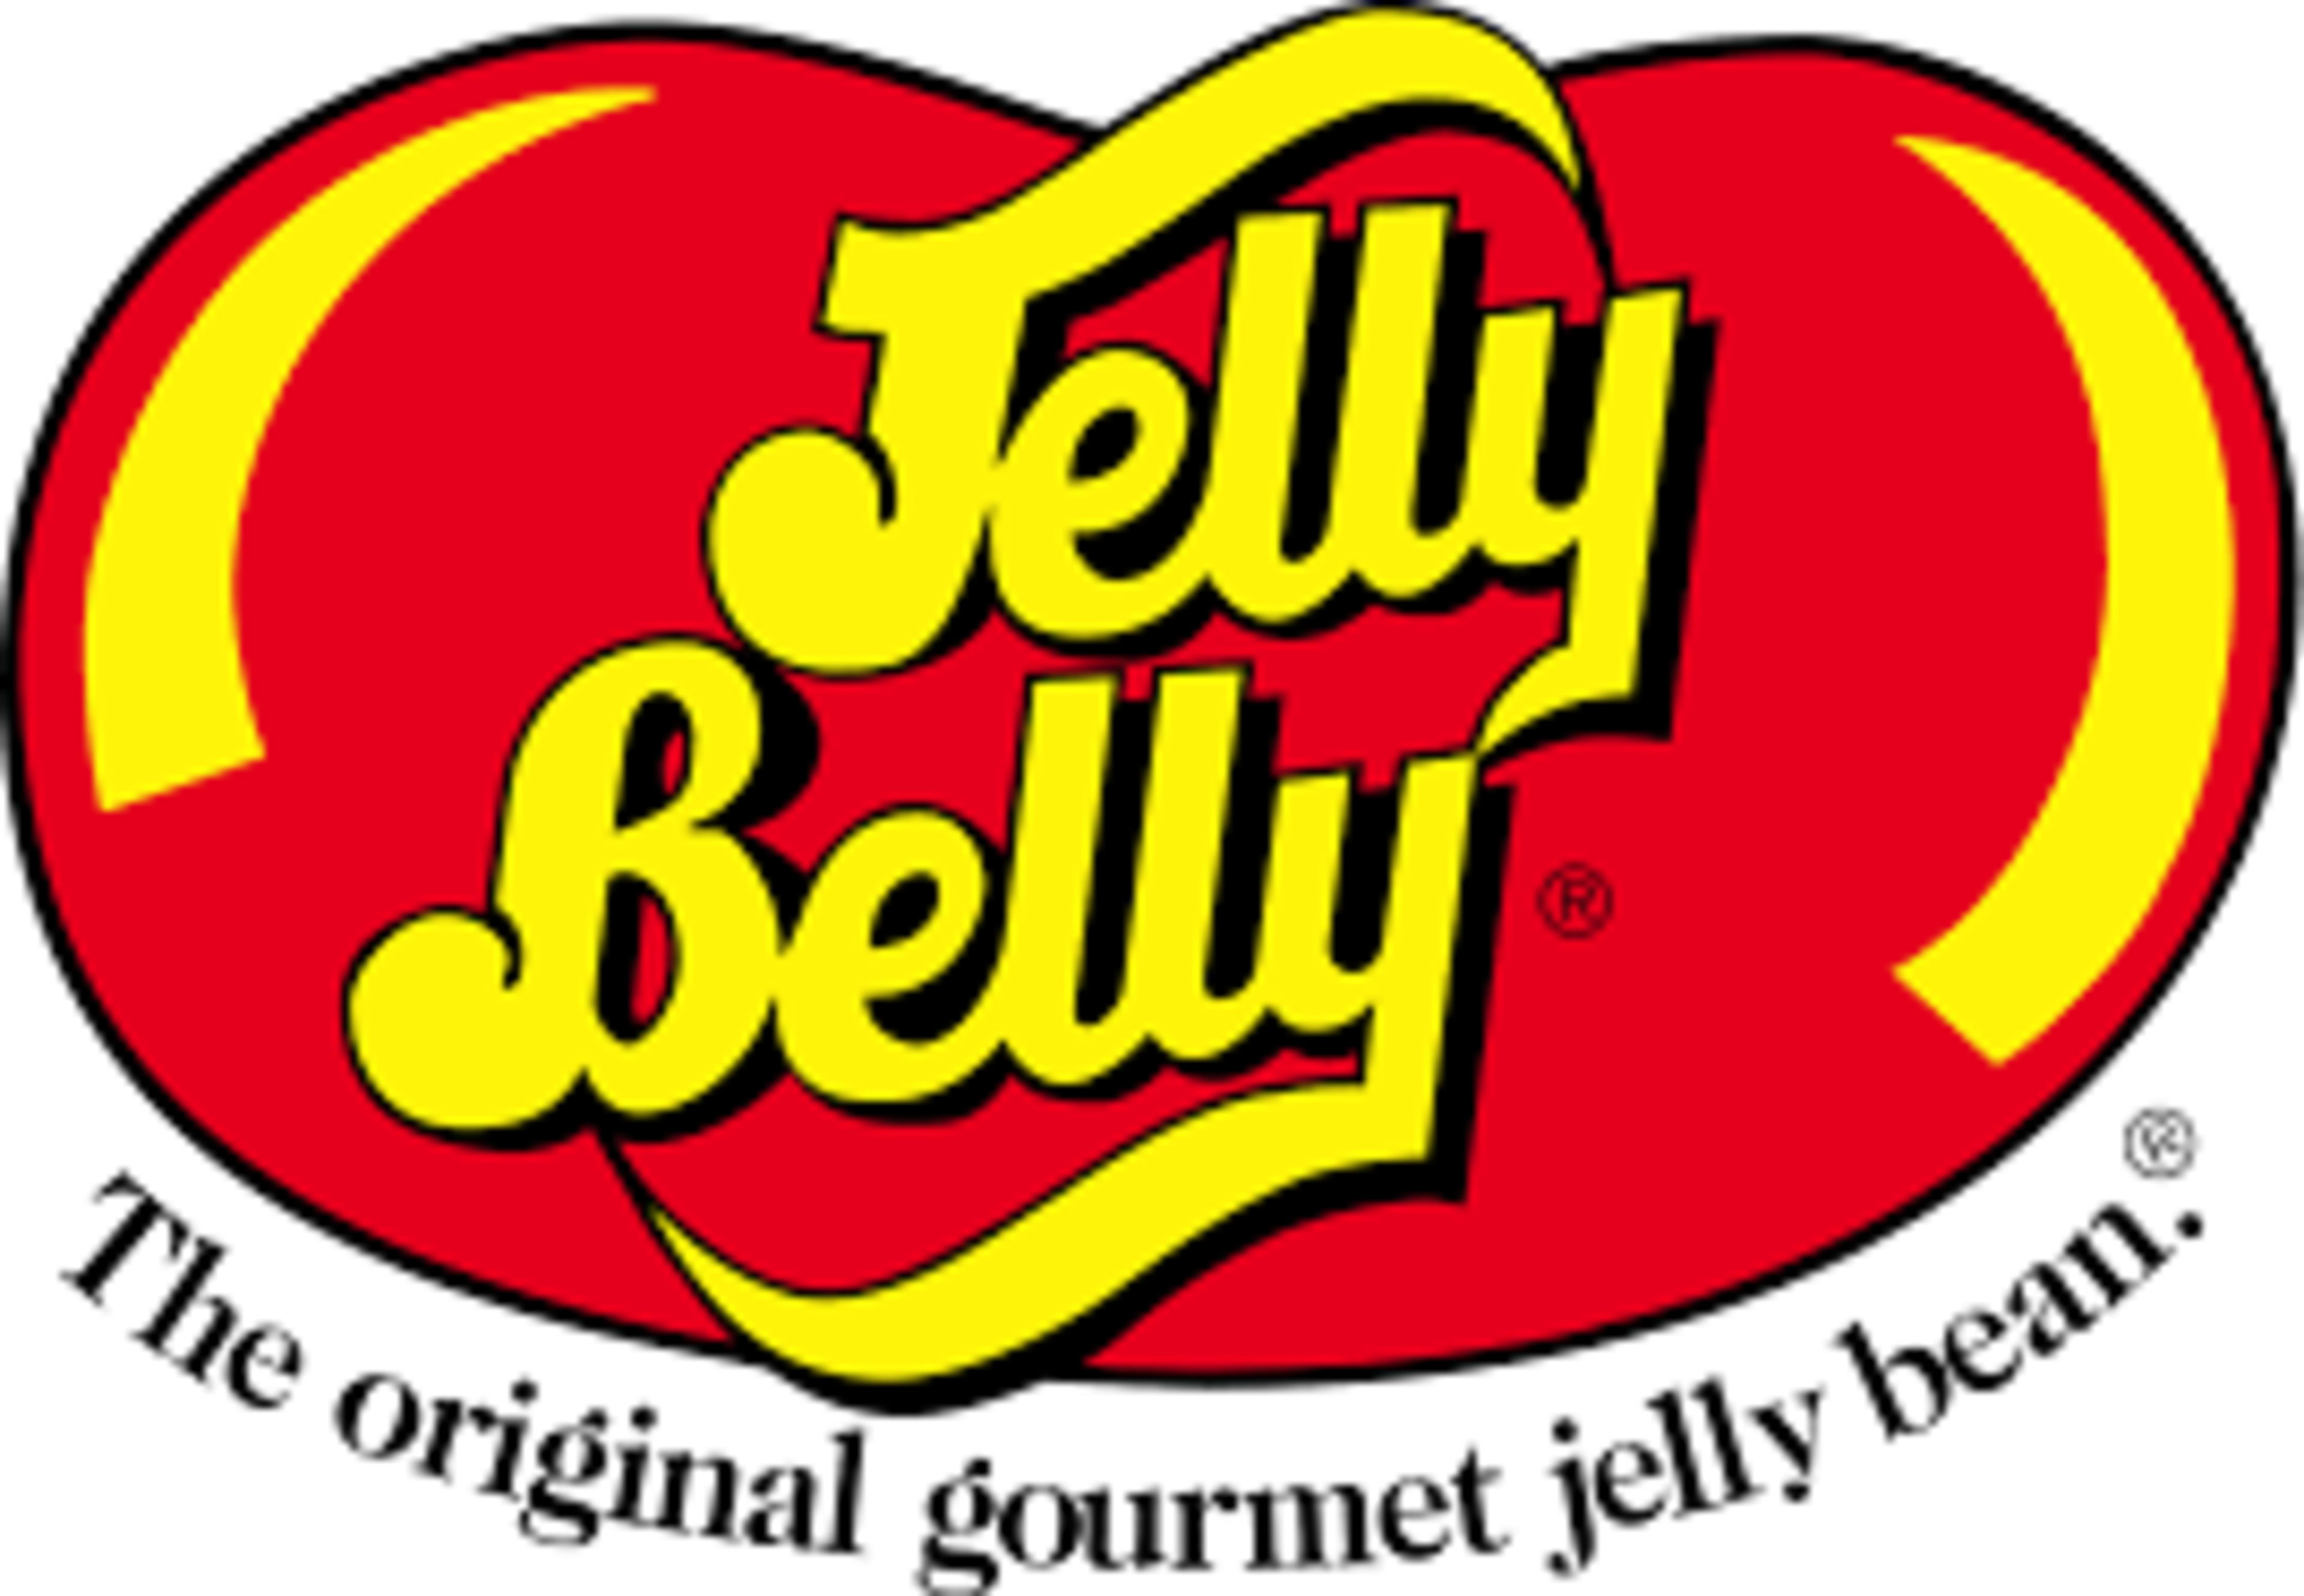 Jelly BellyCode